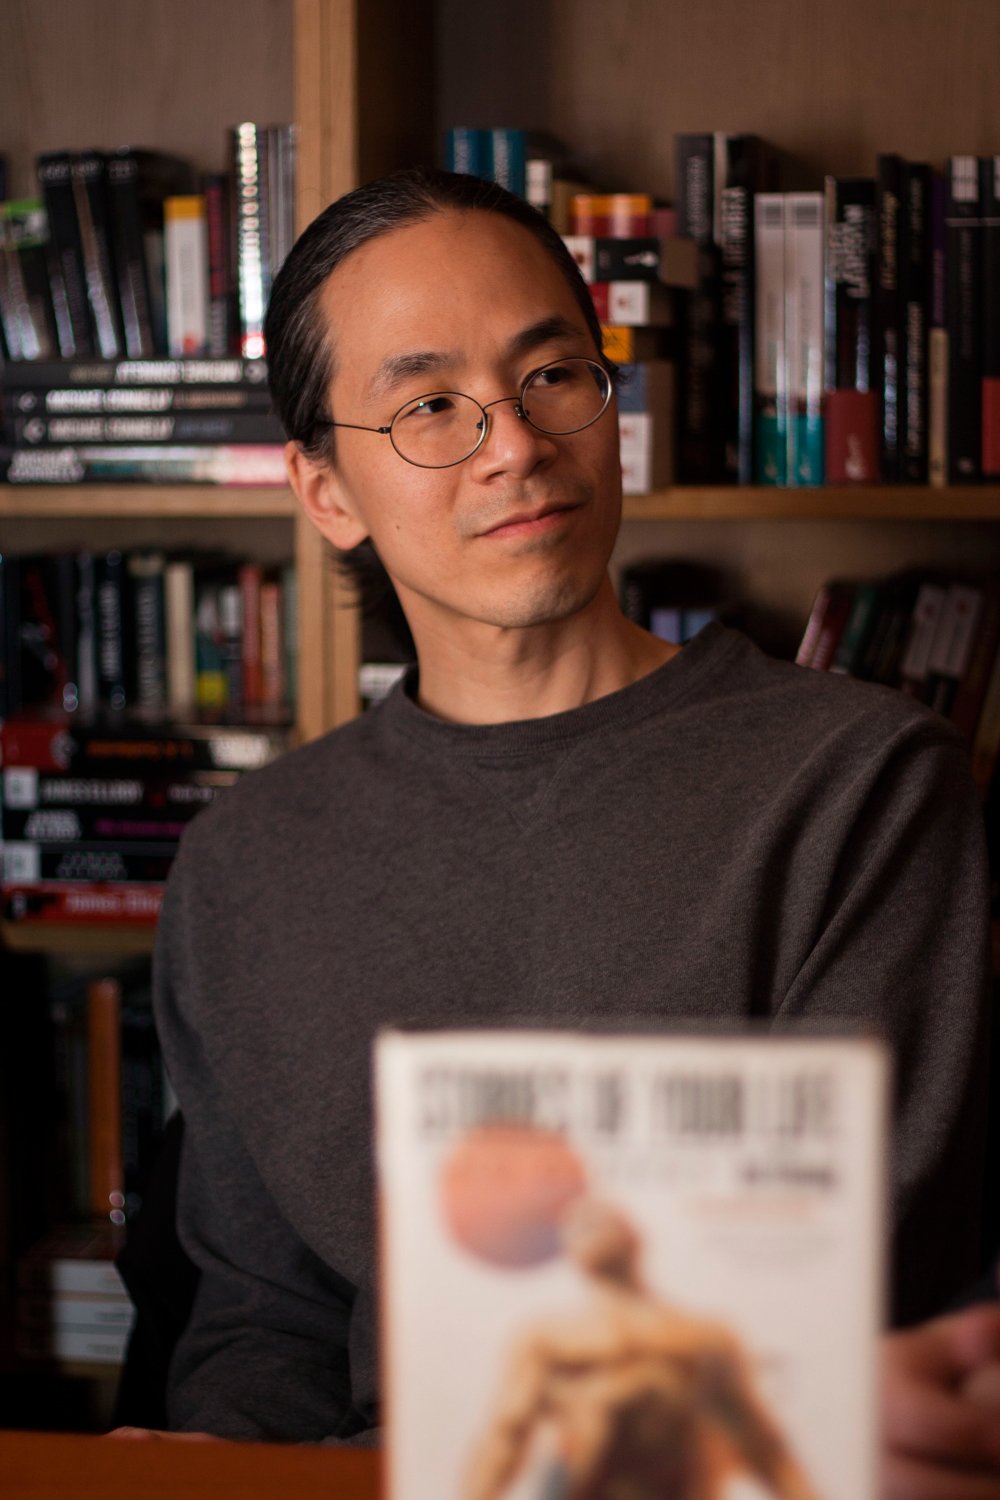 the lifecycle of software objects by ted chiang